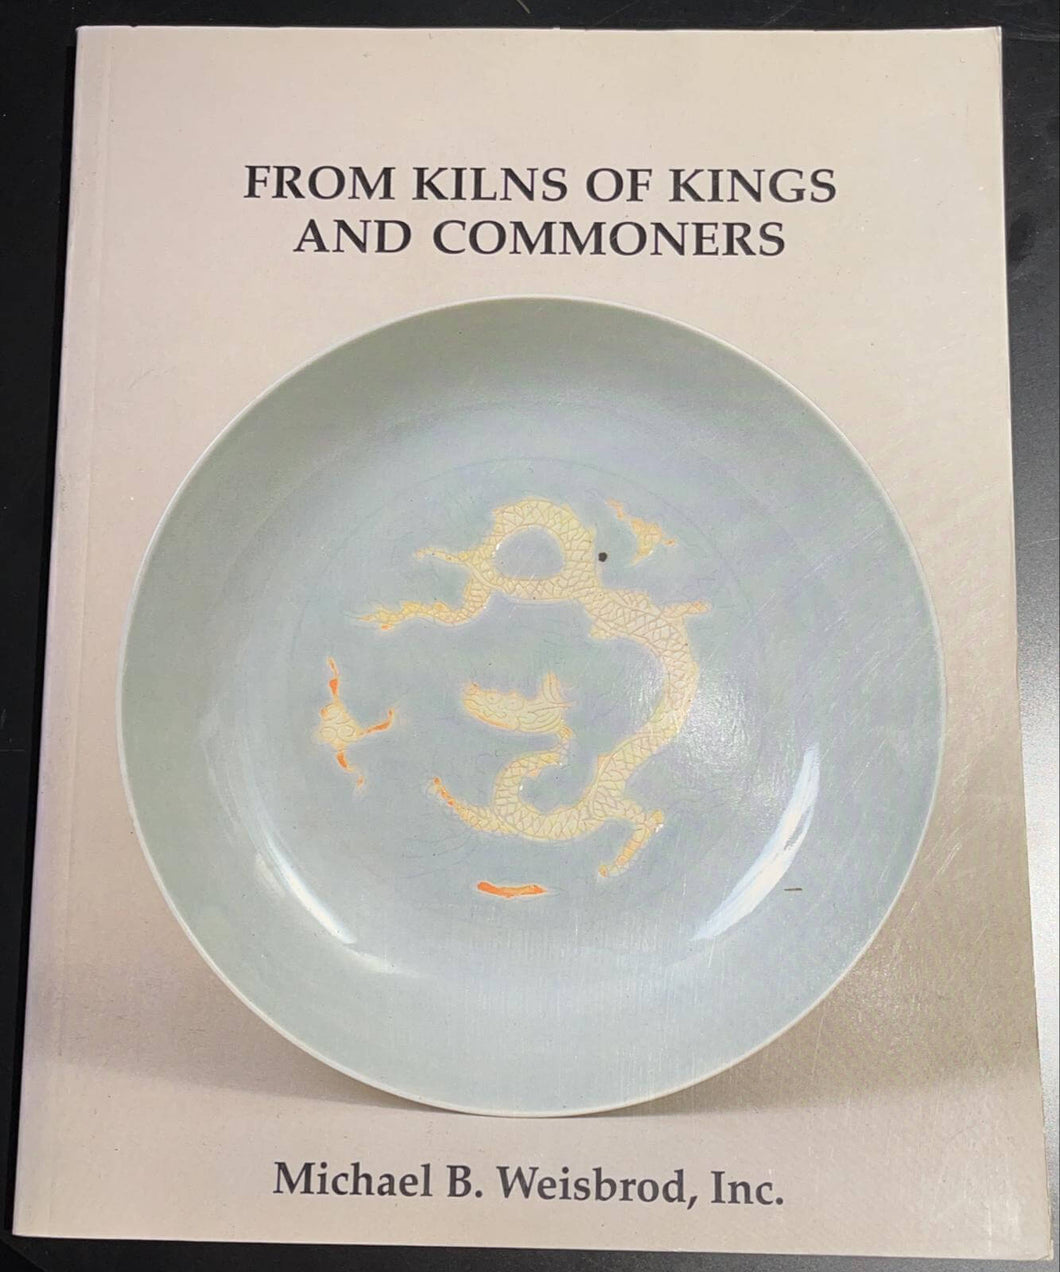 From Kilns of Kings and Commoners - 1990